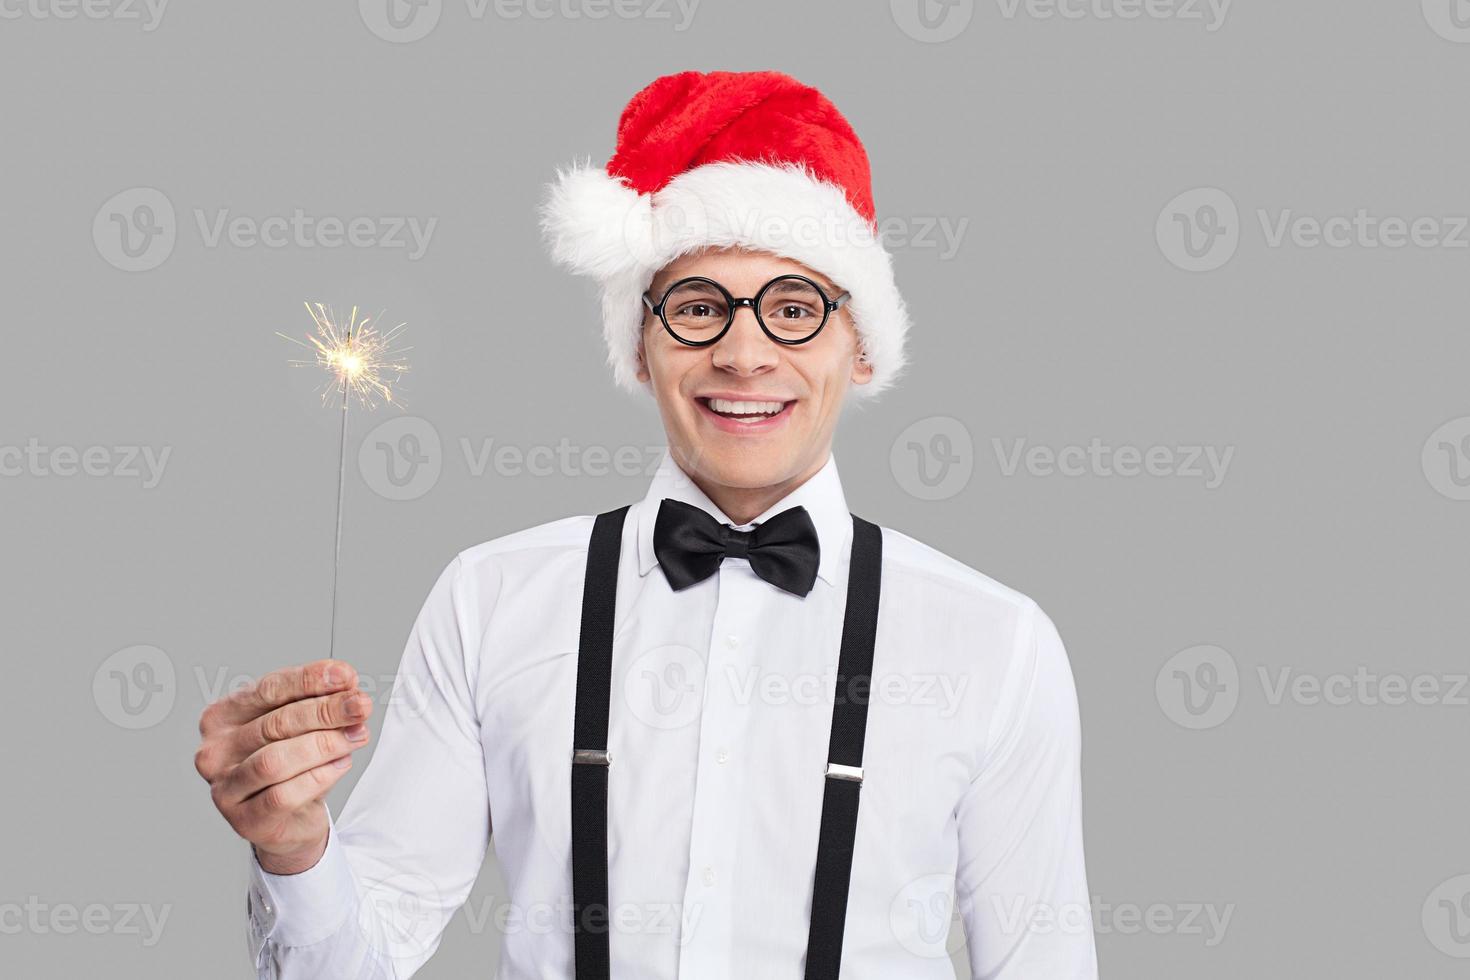 Happy New Year Cheerful young nerd man in bow tie and suspenders holding a sparkler and smiling while standing against grey background photo